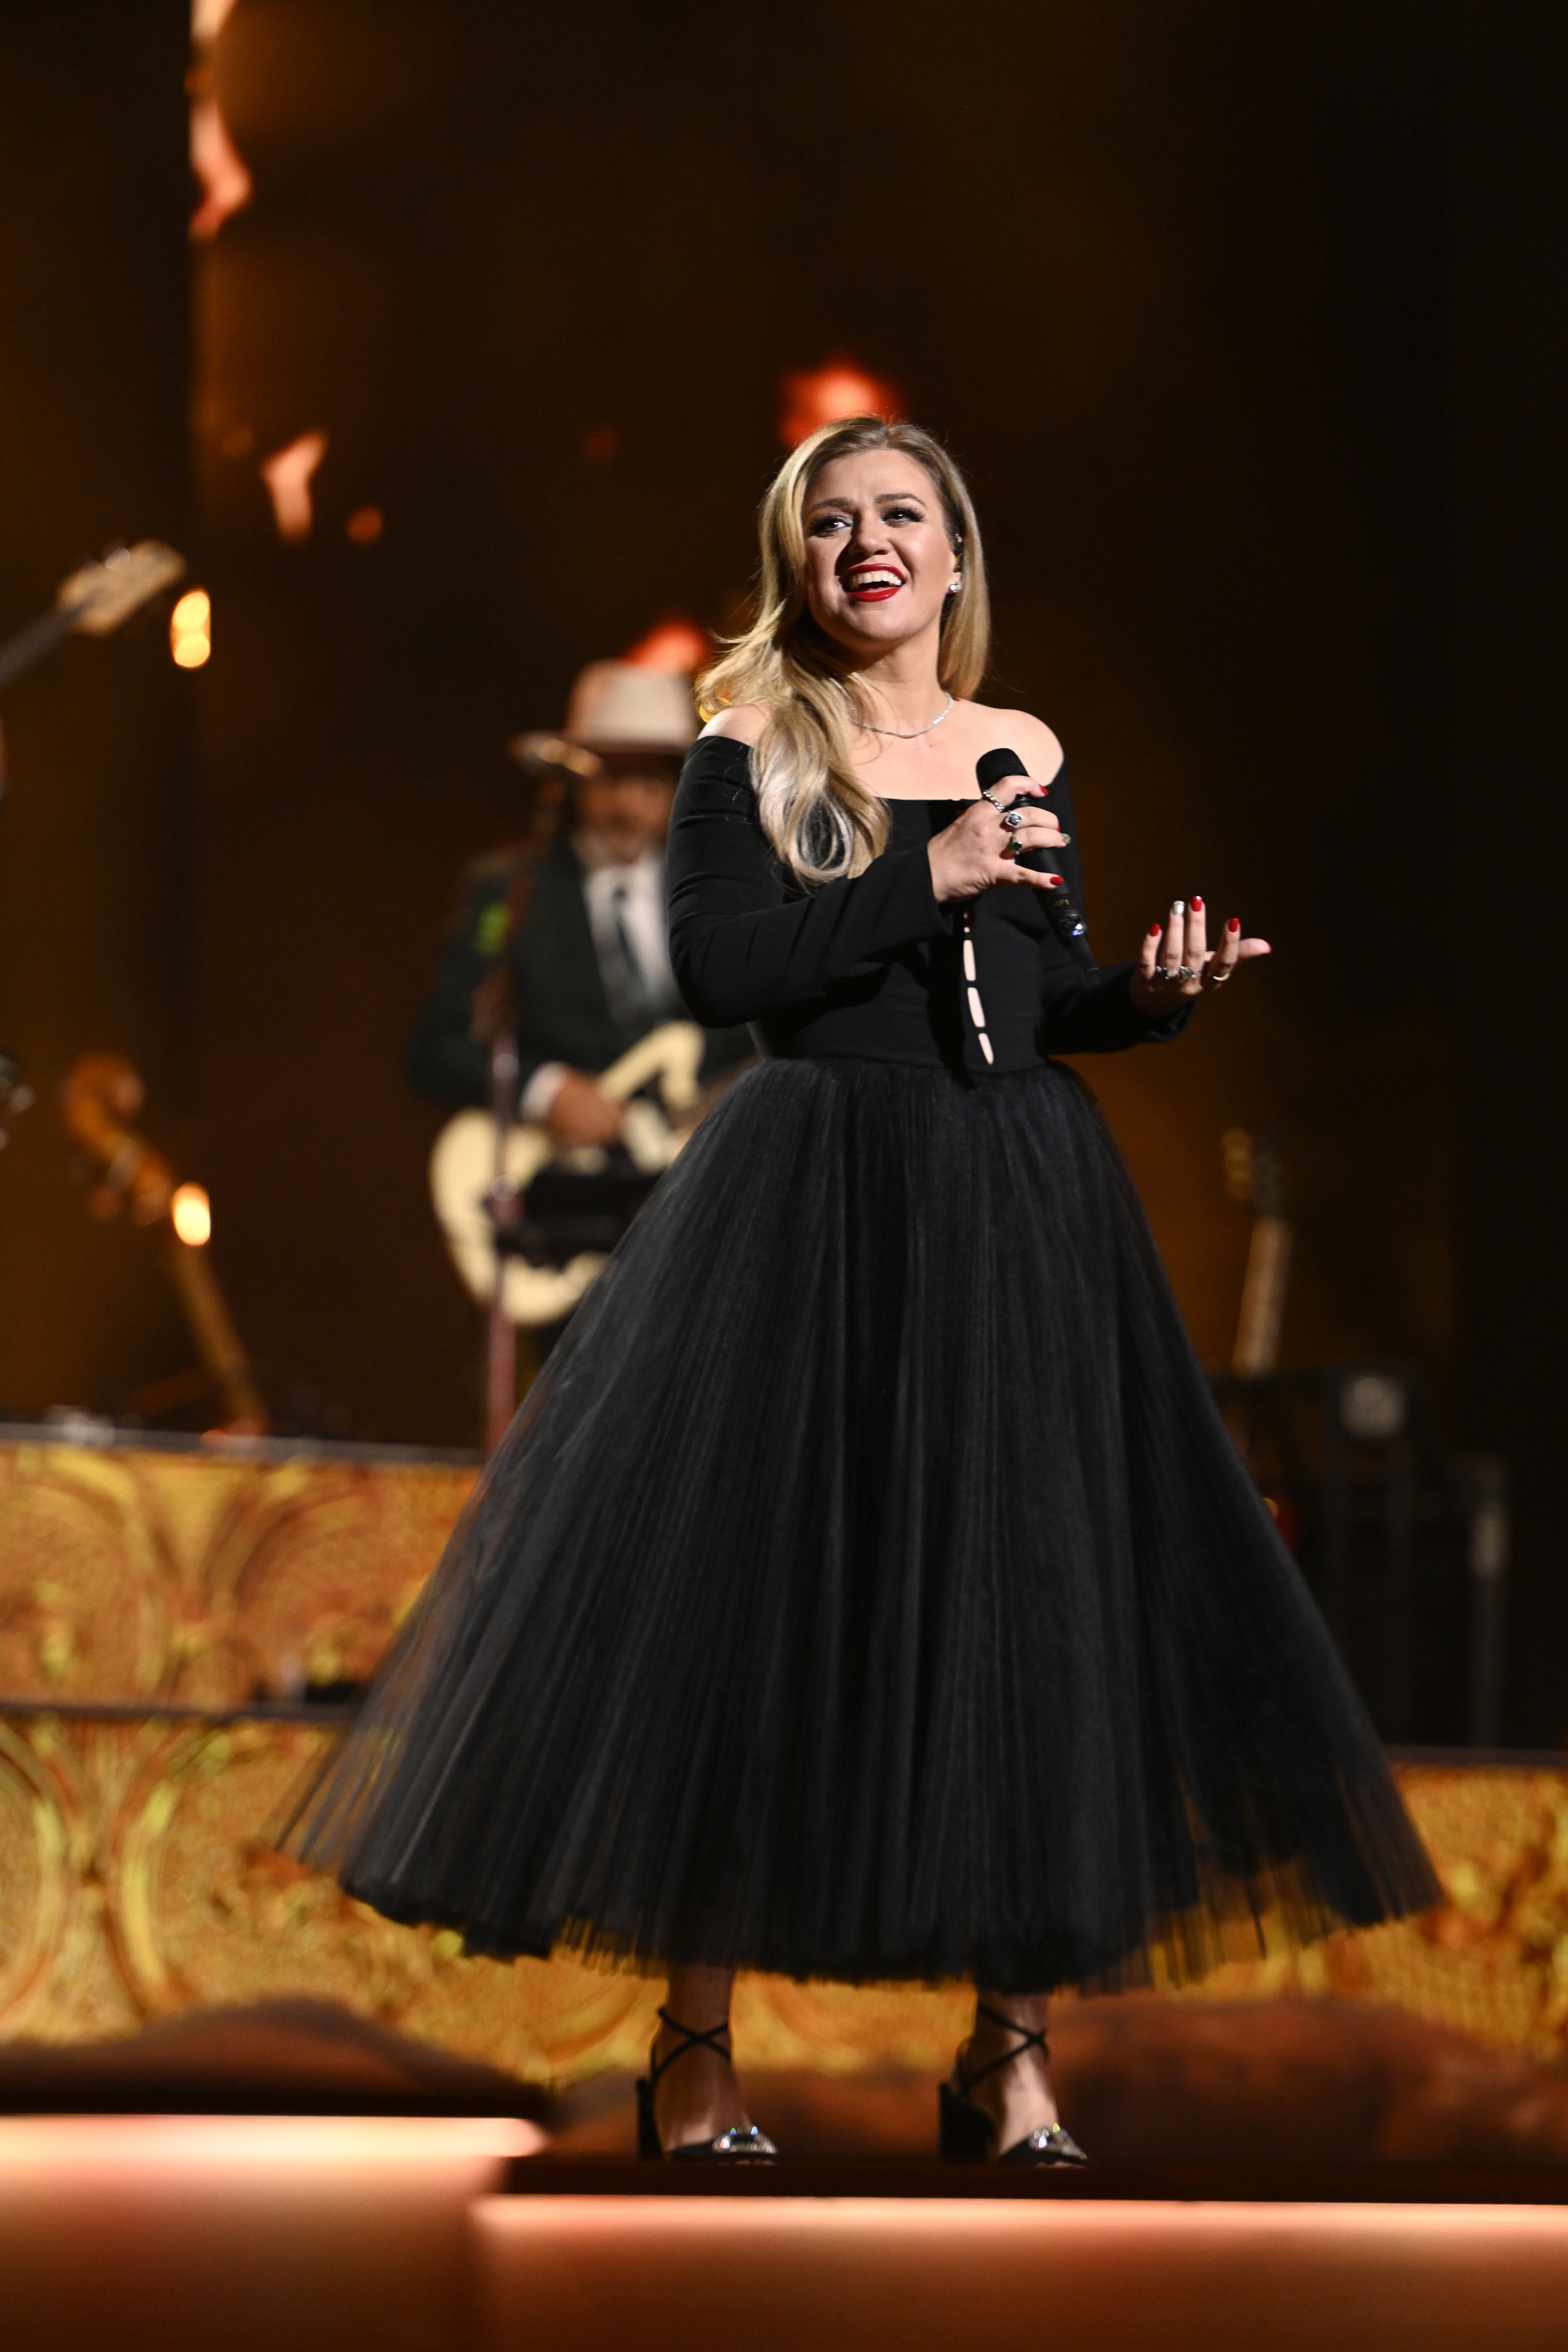 Kelly Clarkson performing on stage in a black tulle dress and heels; a musician is in the background